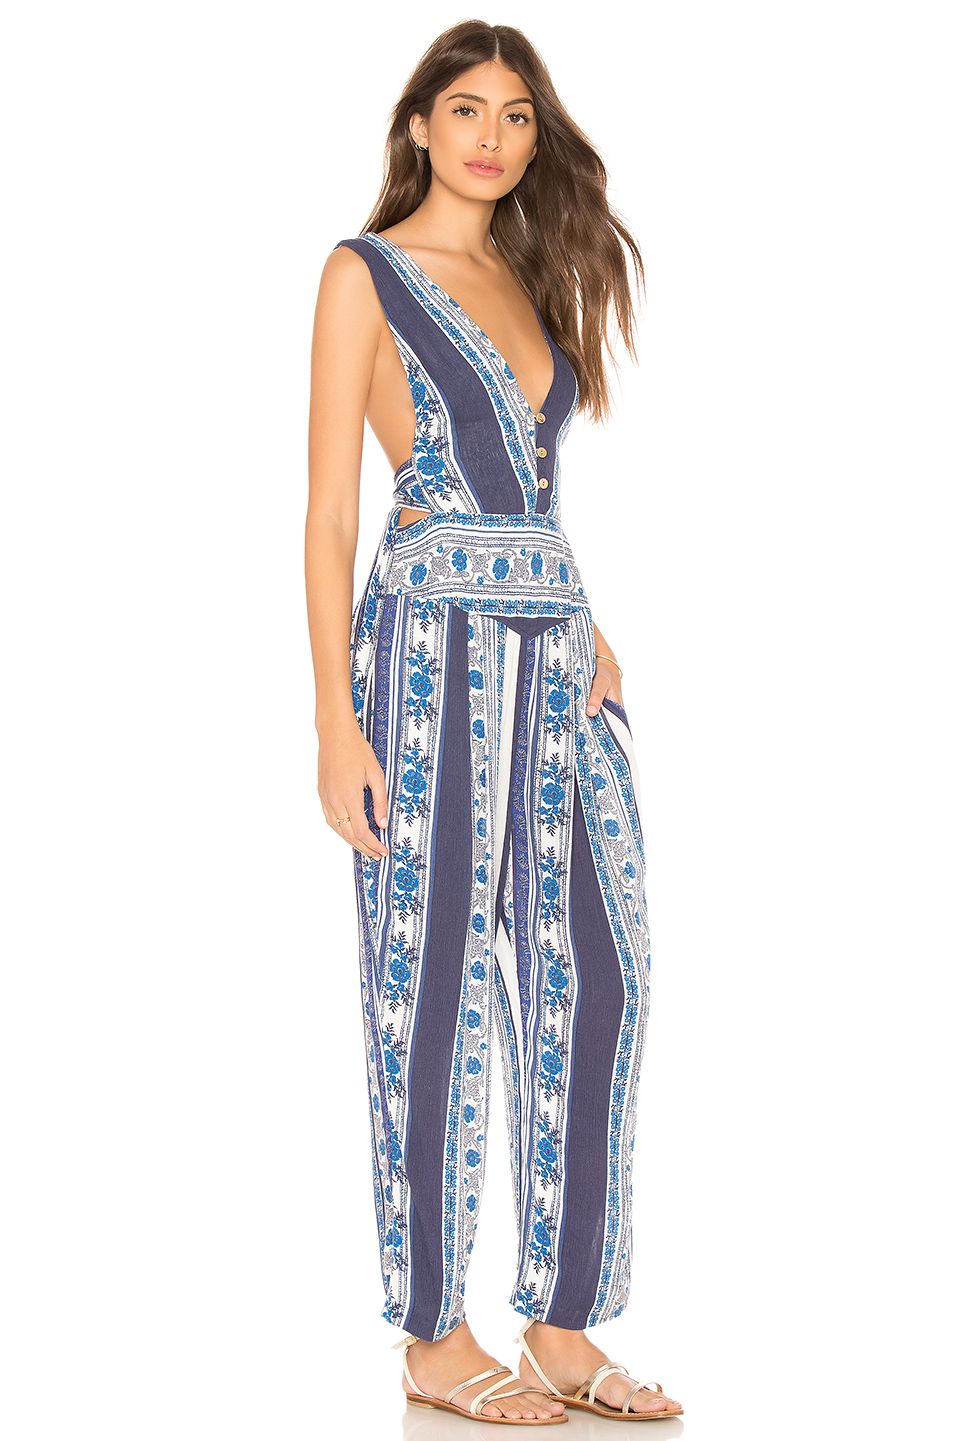 A Patterned Jumpsuit That Looks Great With All Your Sandals